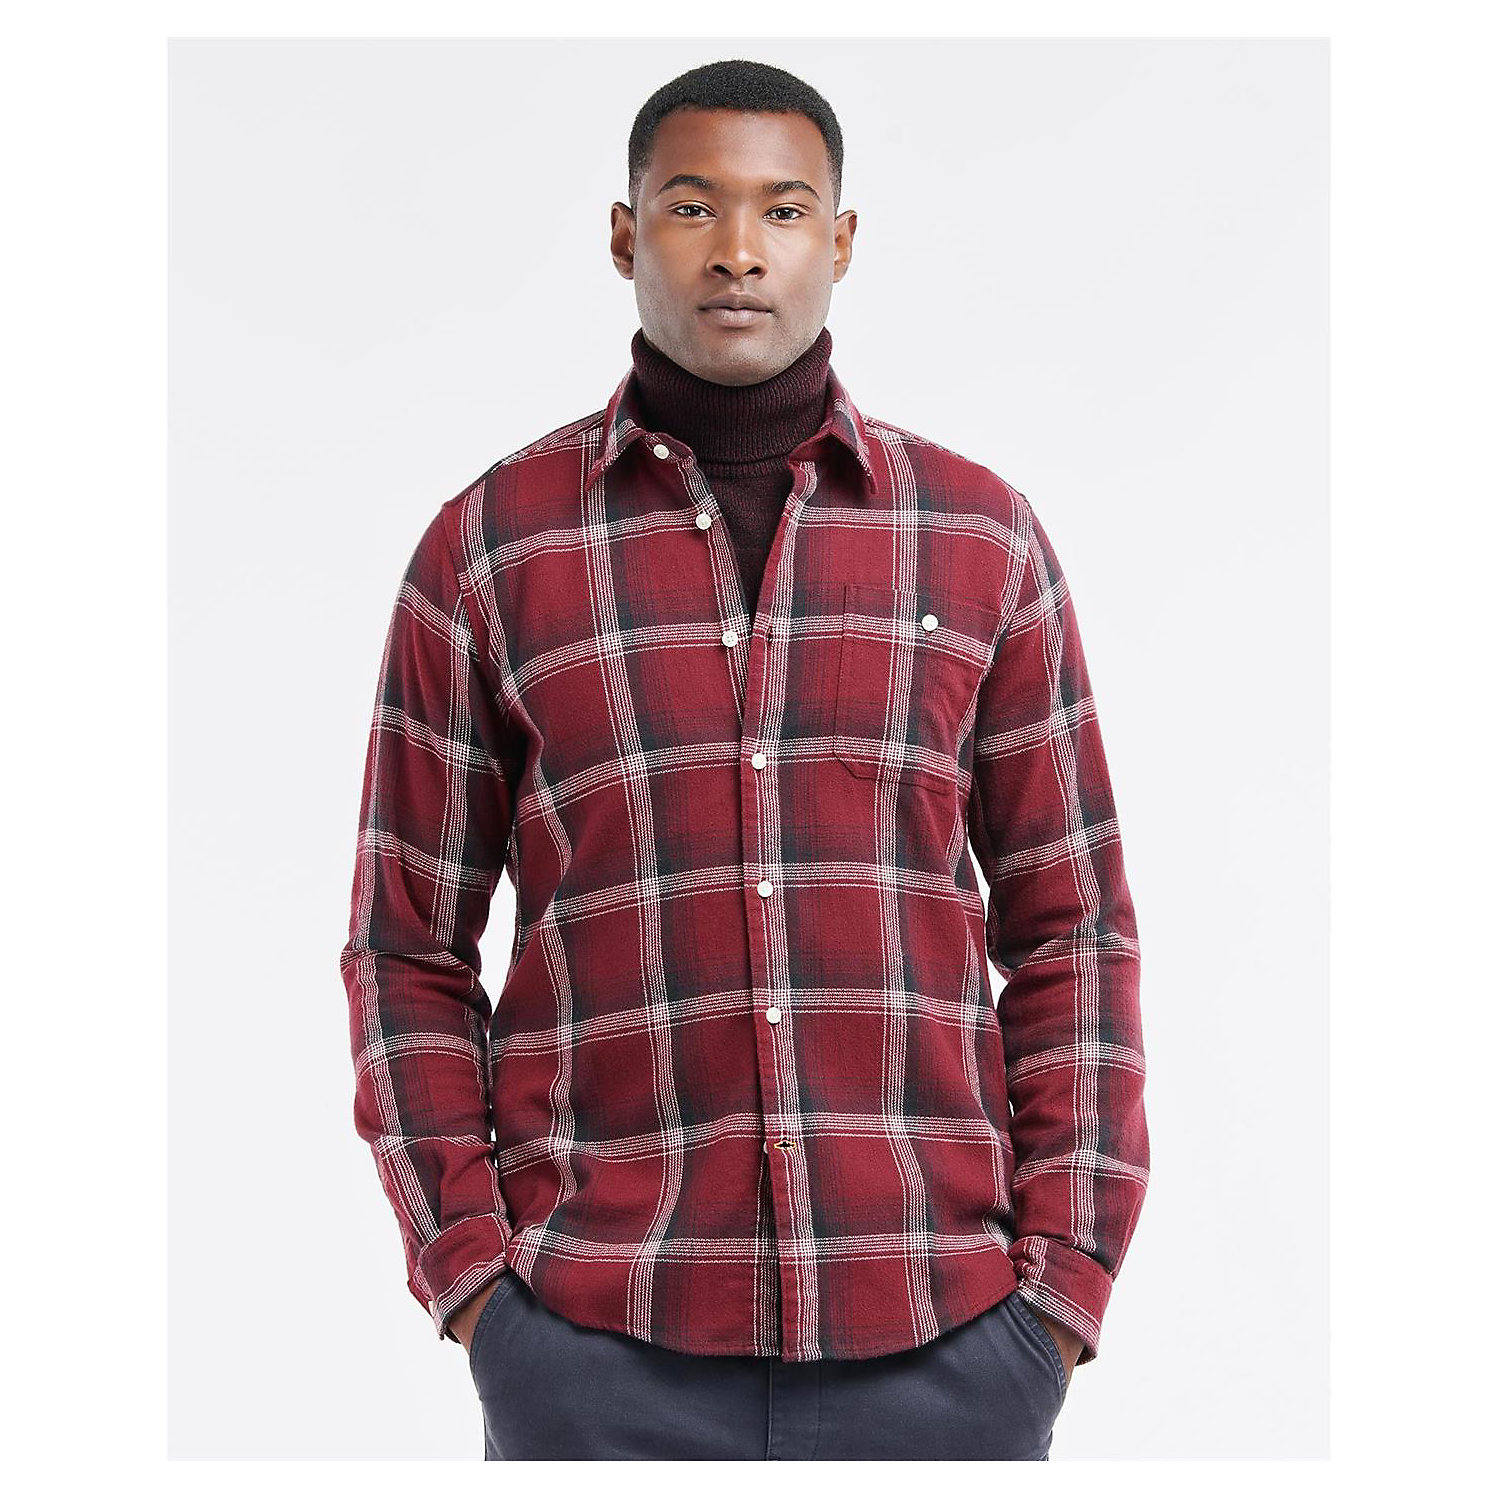 Barbour Mens Chester Tailored Shirt